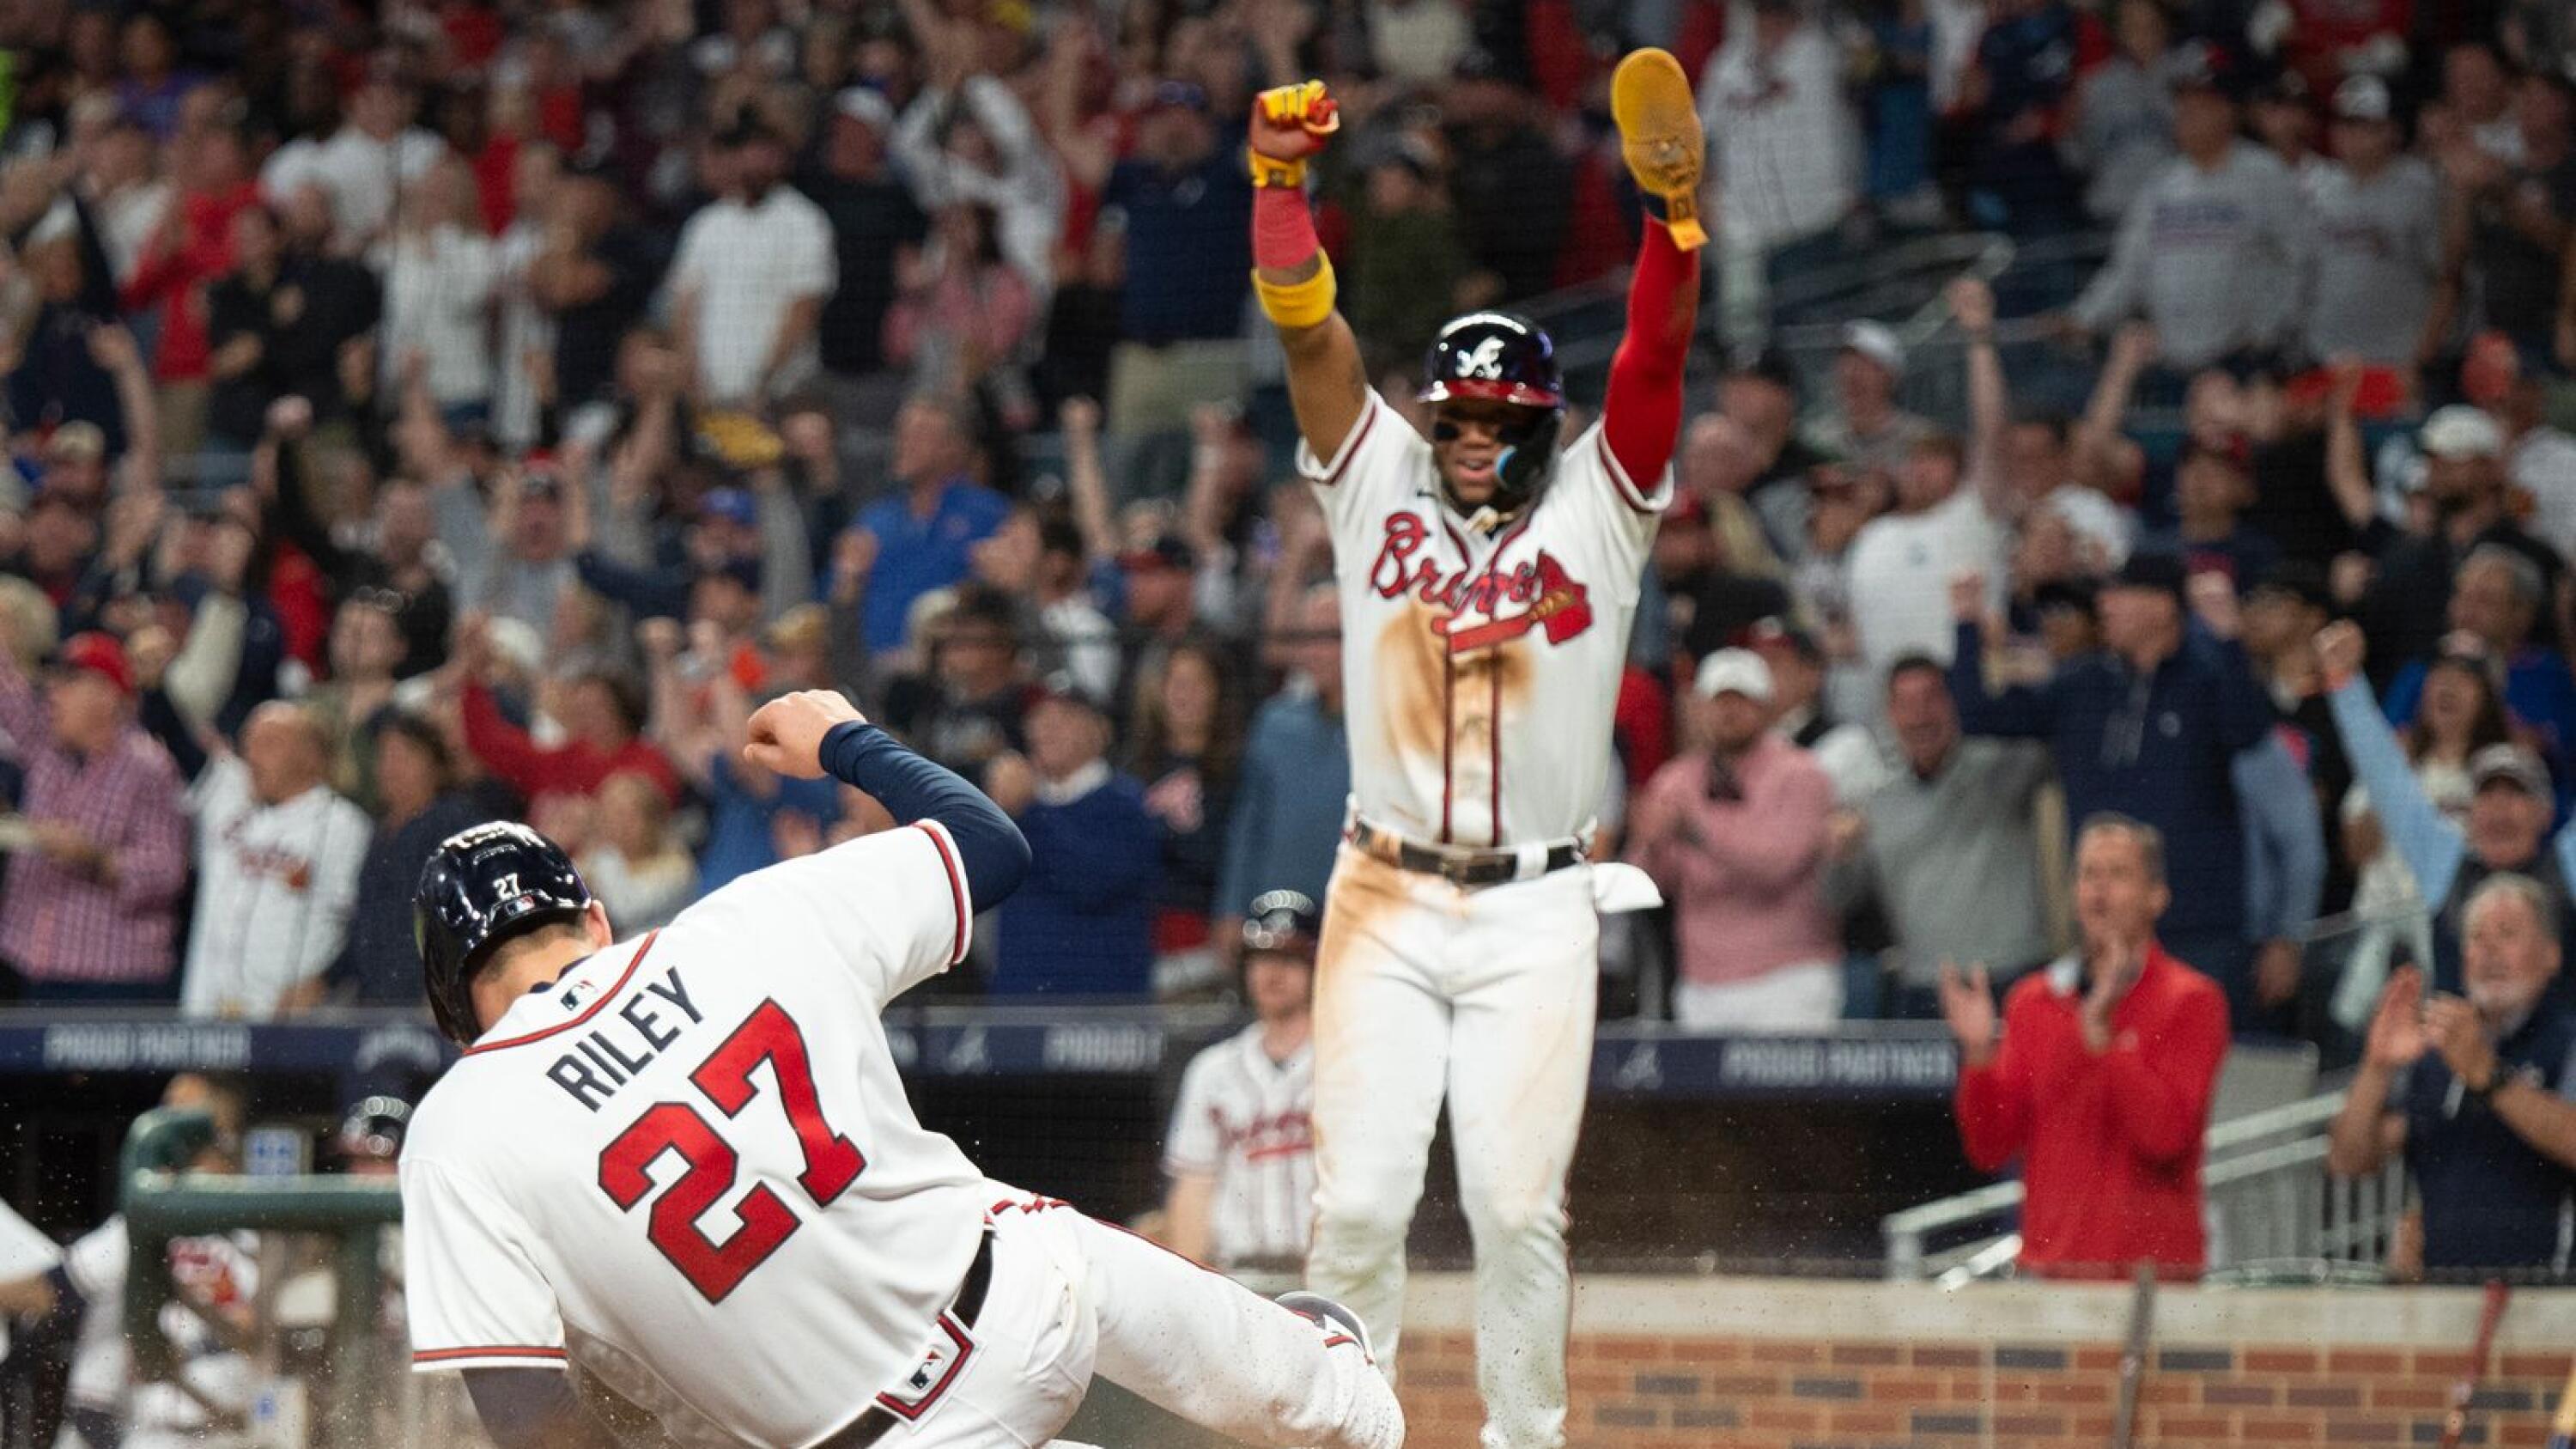 Braves beat Marlins 2-1, clinch 5th straight NL East title